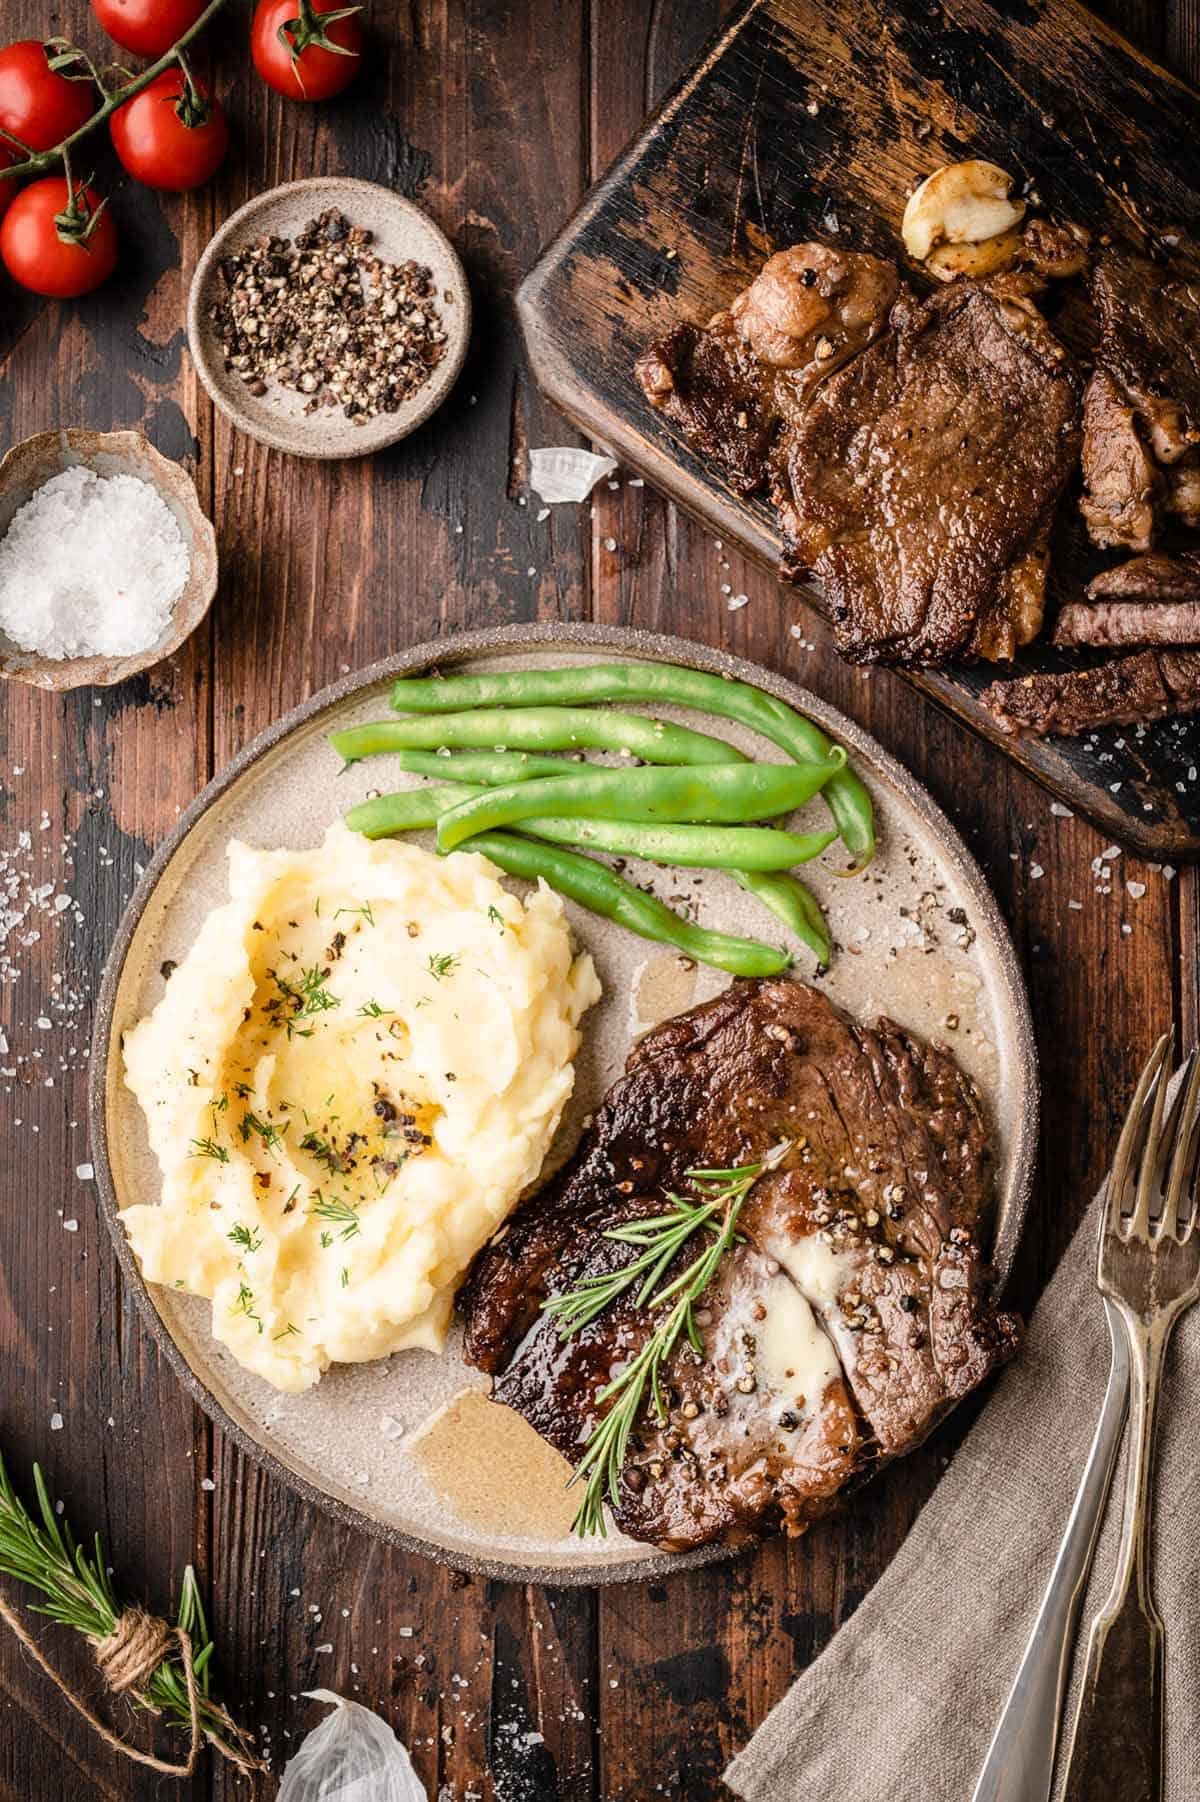 An overhead shot of the plate with pan seared wagyu ribeye steaks served with mashed potatoes and roasted green beans.